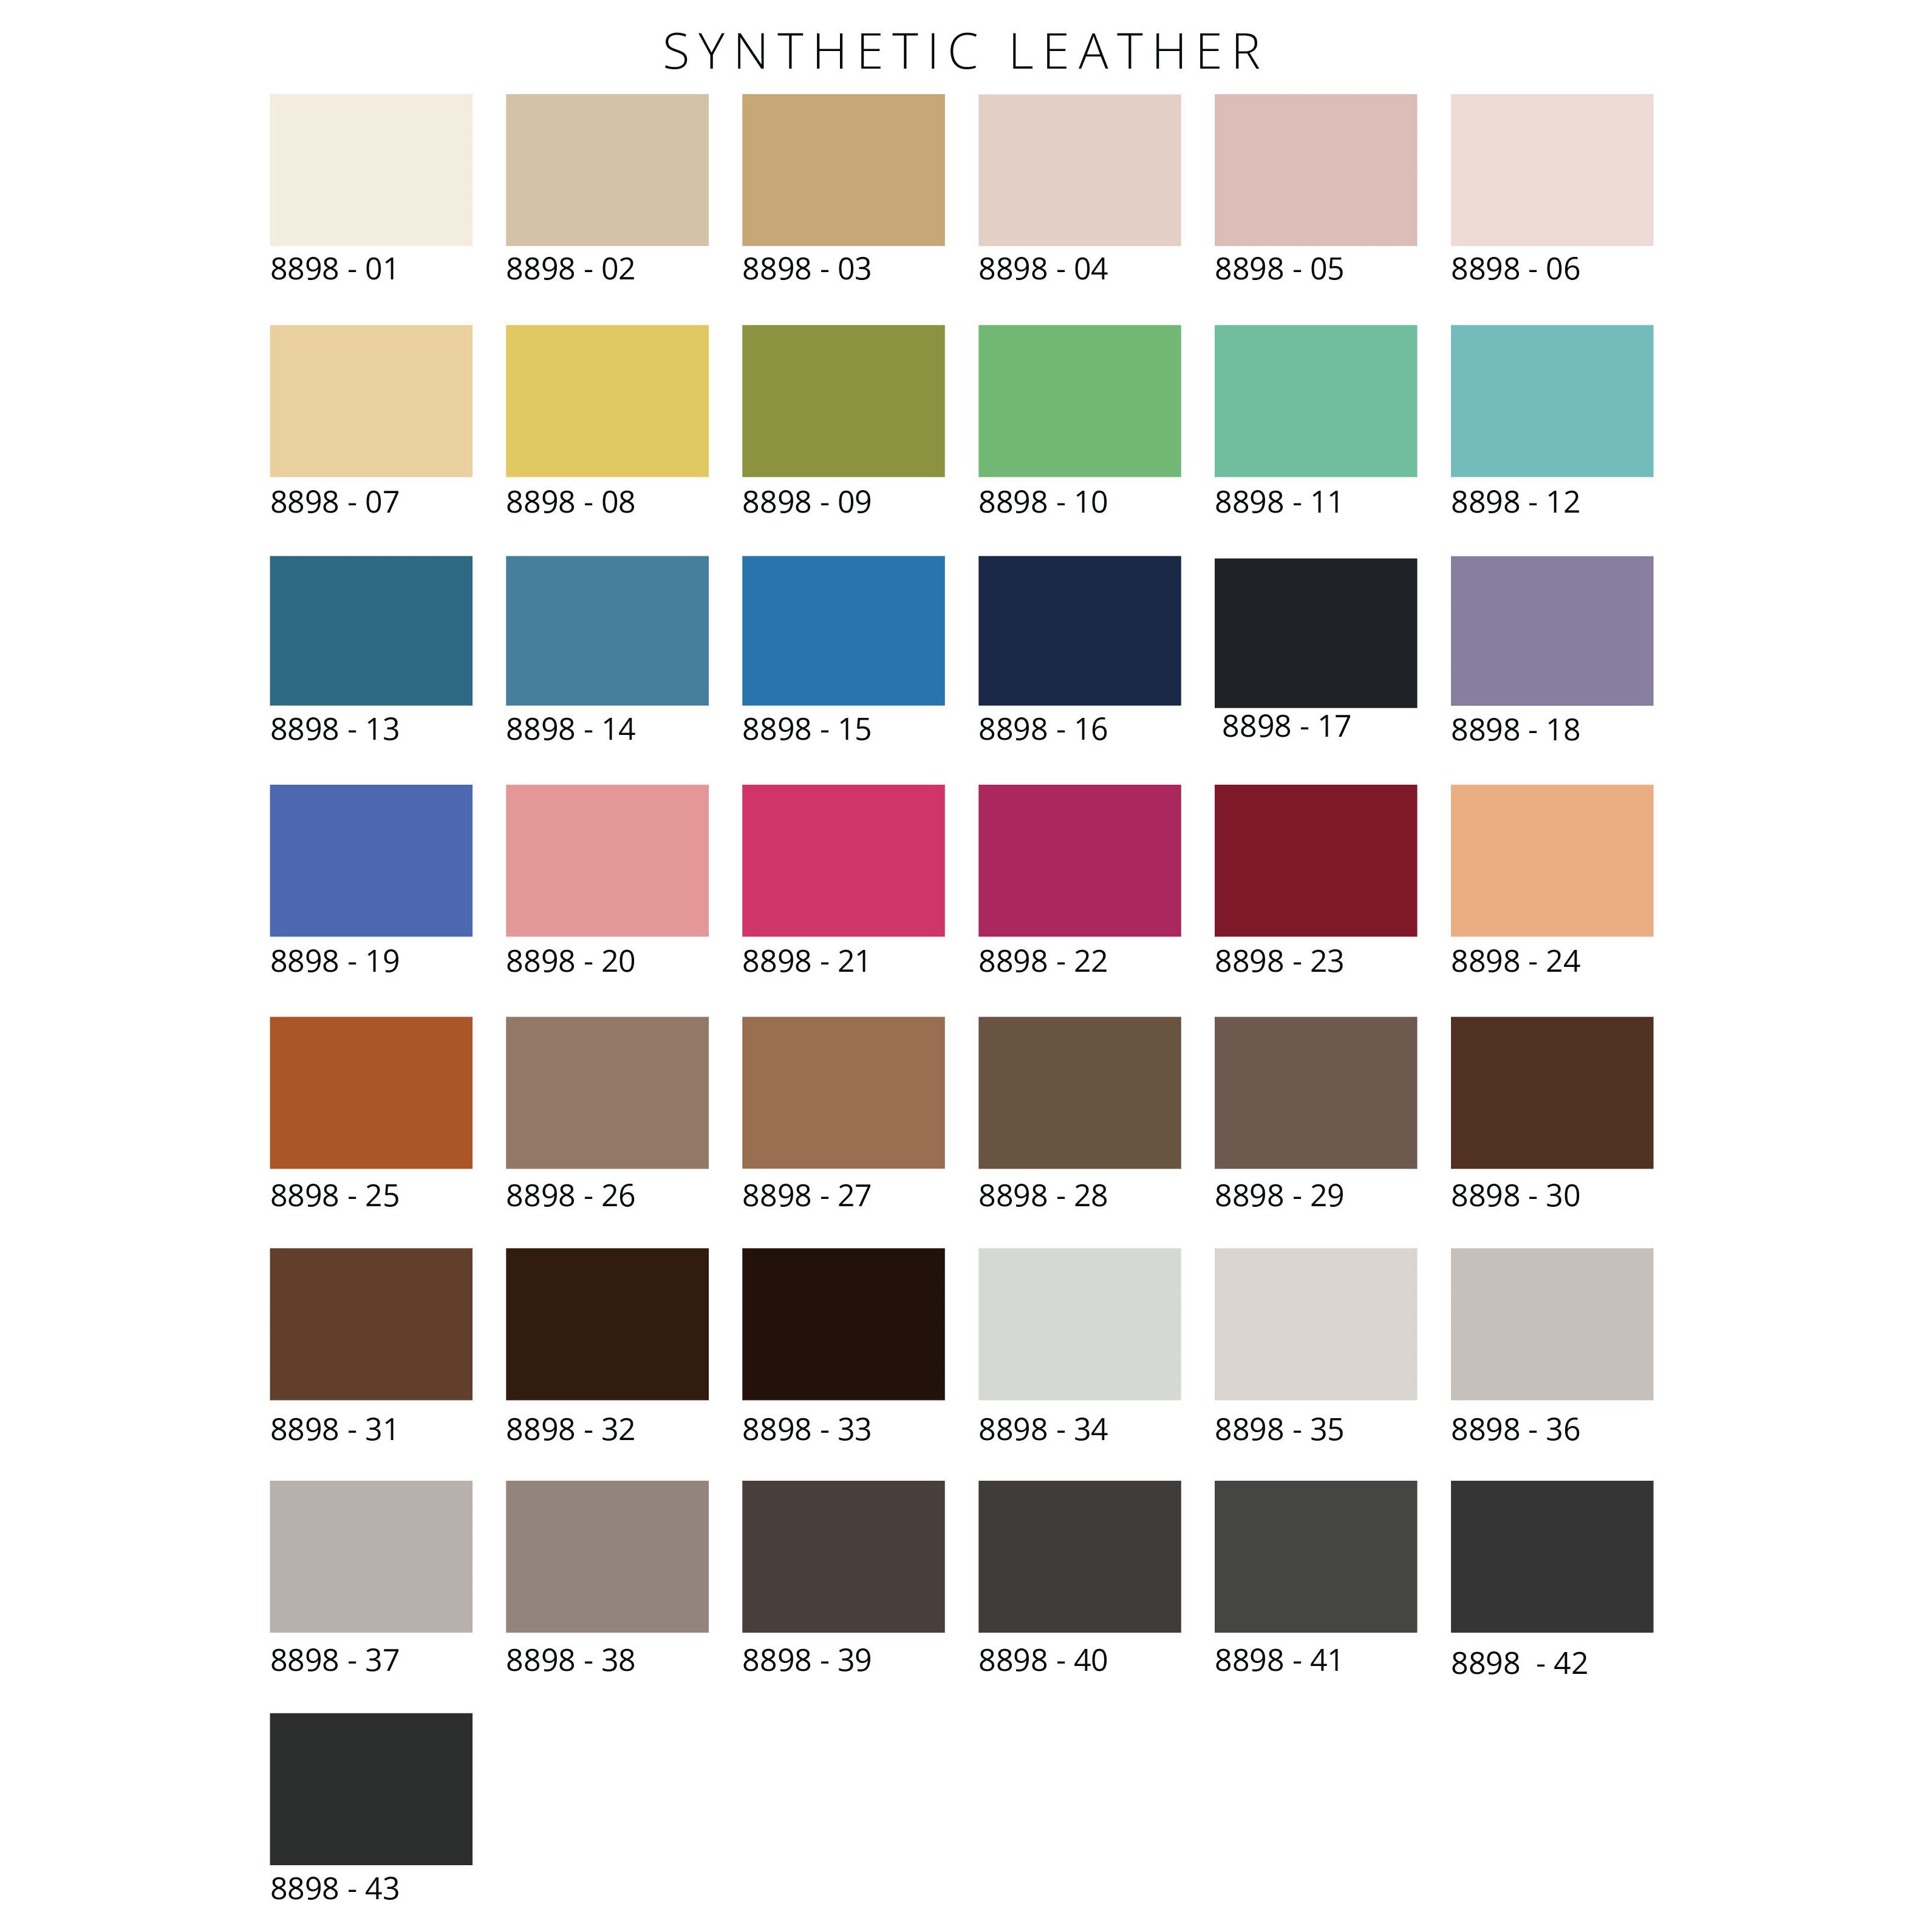 Synthetic Leather Squaree.jpg